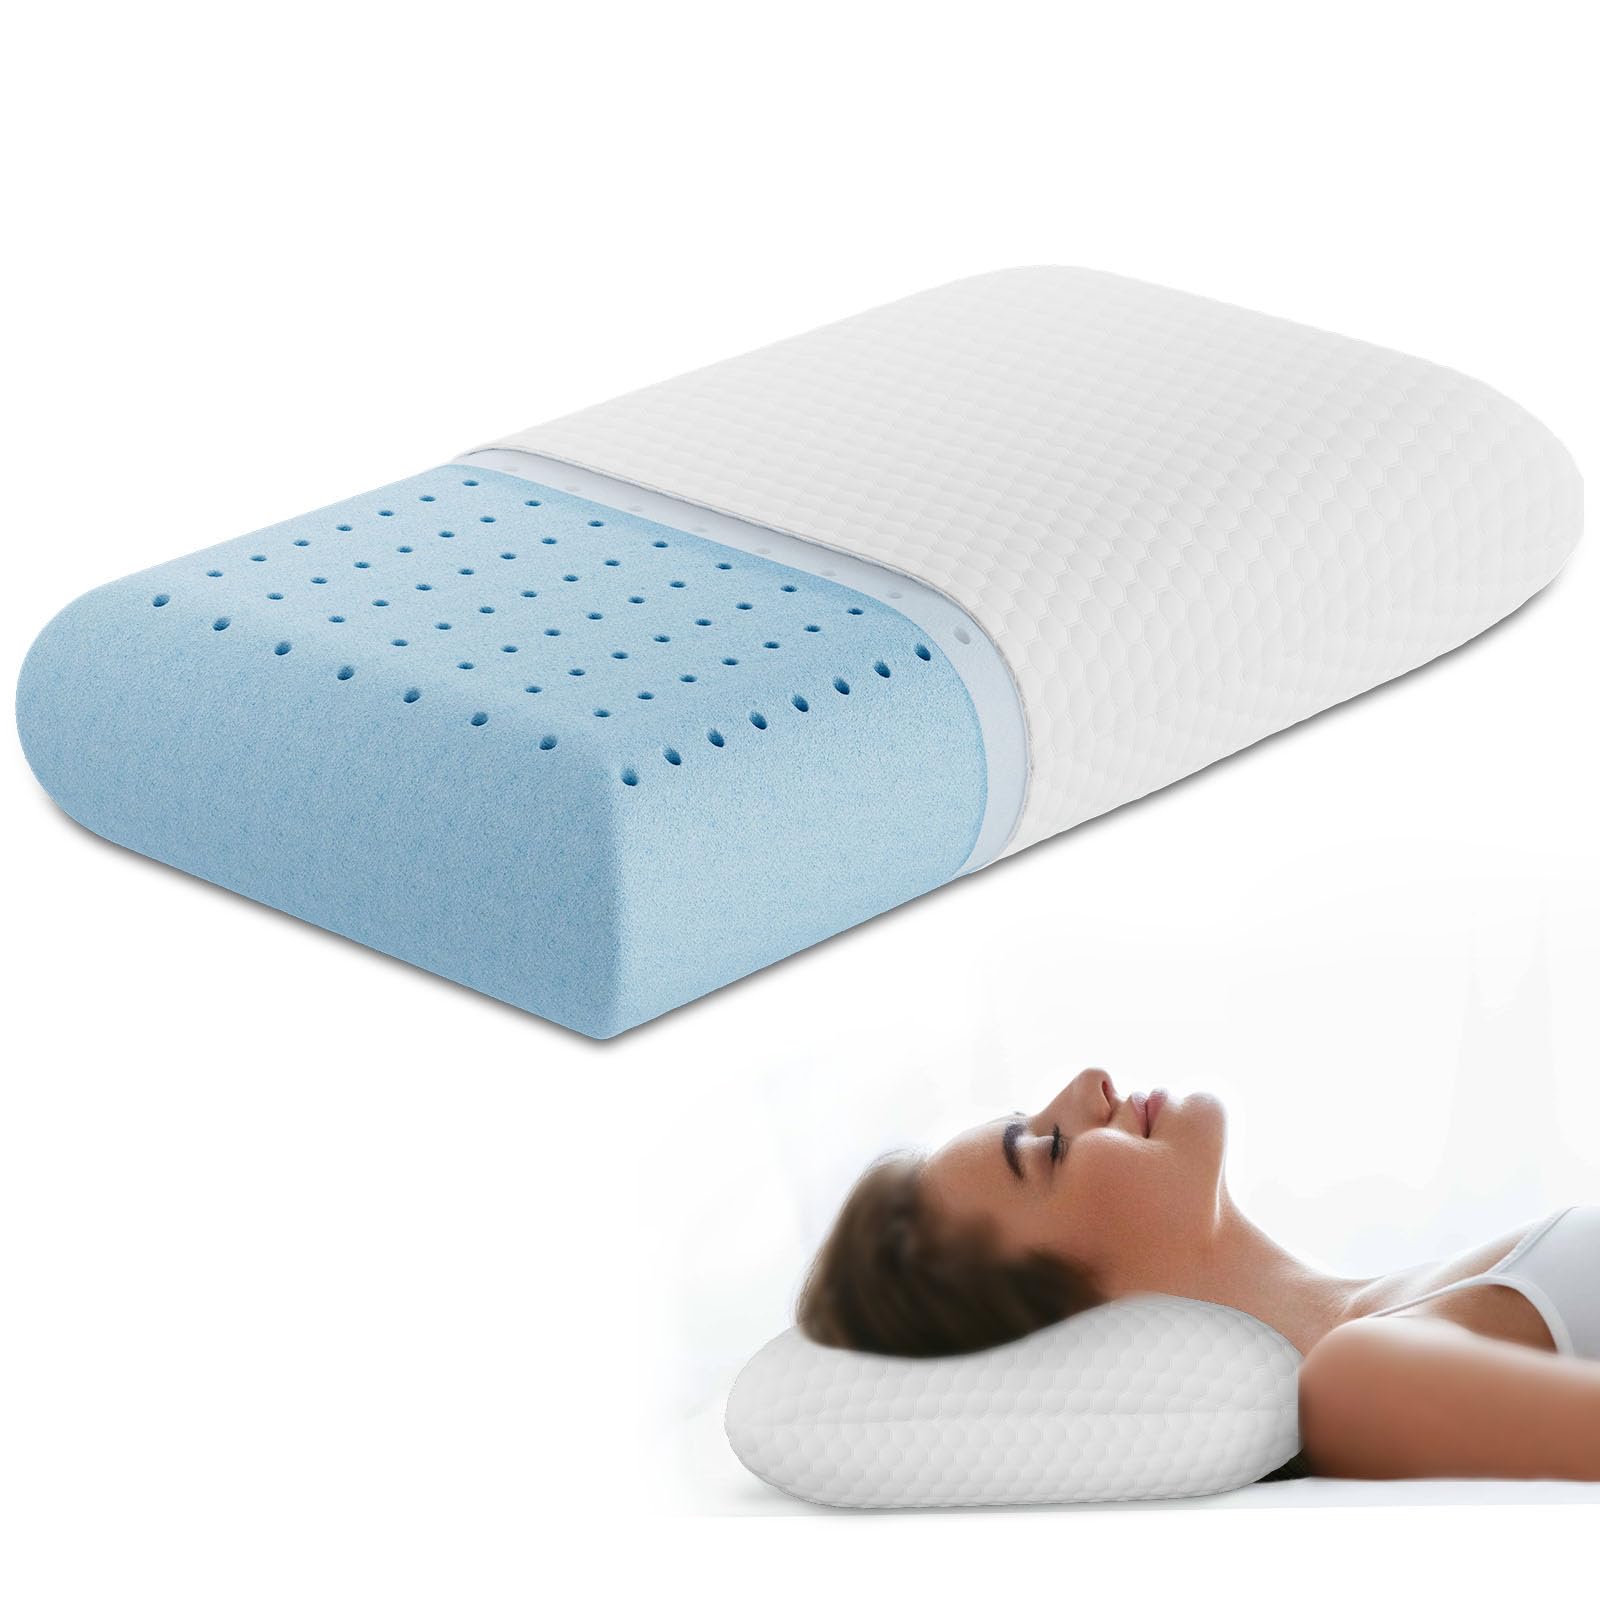 OLIXIS Memory Foam Pillow, Standard Size Pillows for Sleeping, Bed Pillow Soft and Comfortable, Cooling Hotel Pillow for Side Sleeper, Machine Washable Cover, 24" x 16" $12.99